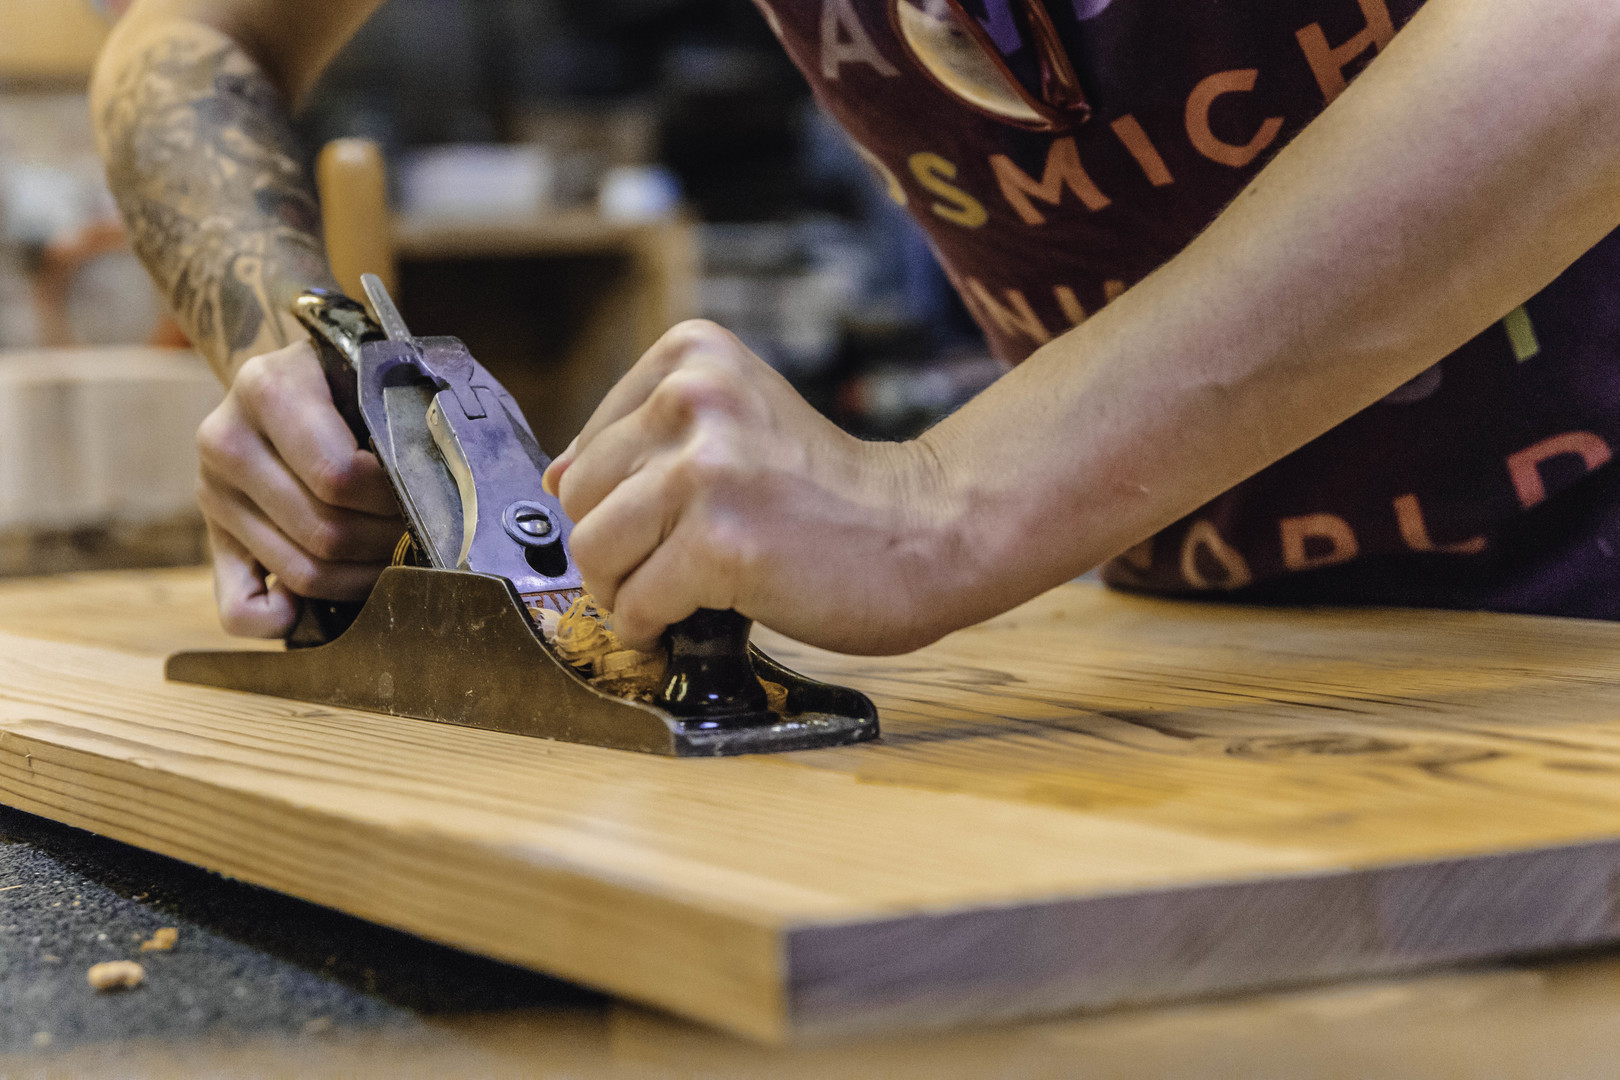 Woodworking 101: Table Making Series- Workshop/Class in Chicago September 29-October 27, Chicago, Illinois, United States